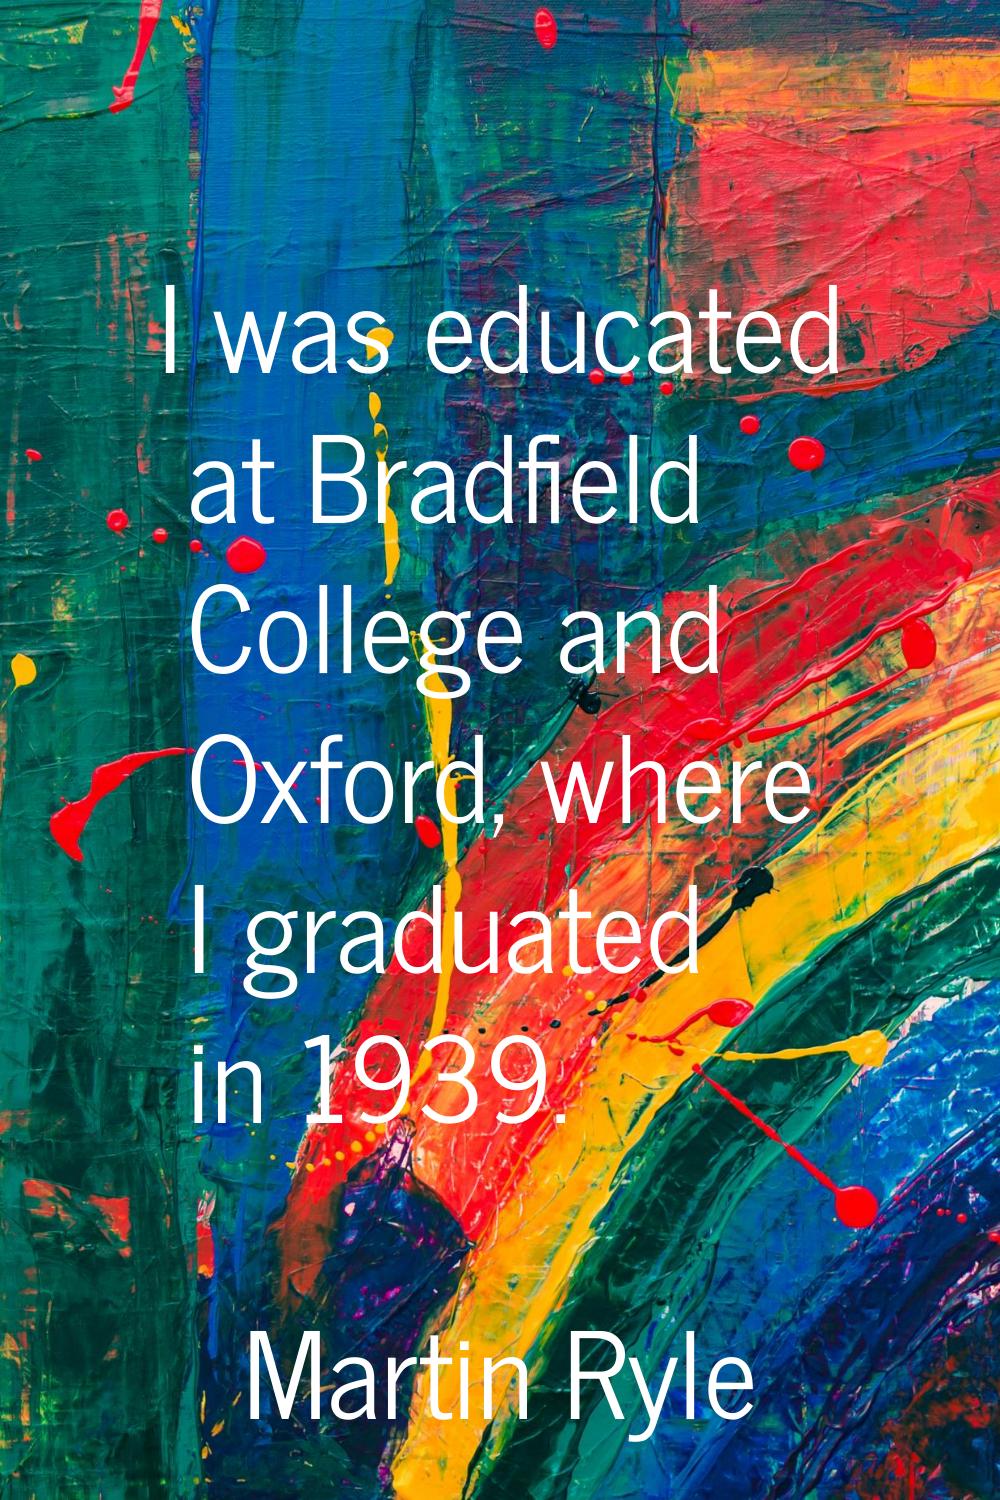 I was educated at Bradfield College and Oxford, where I graduated in 1939.